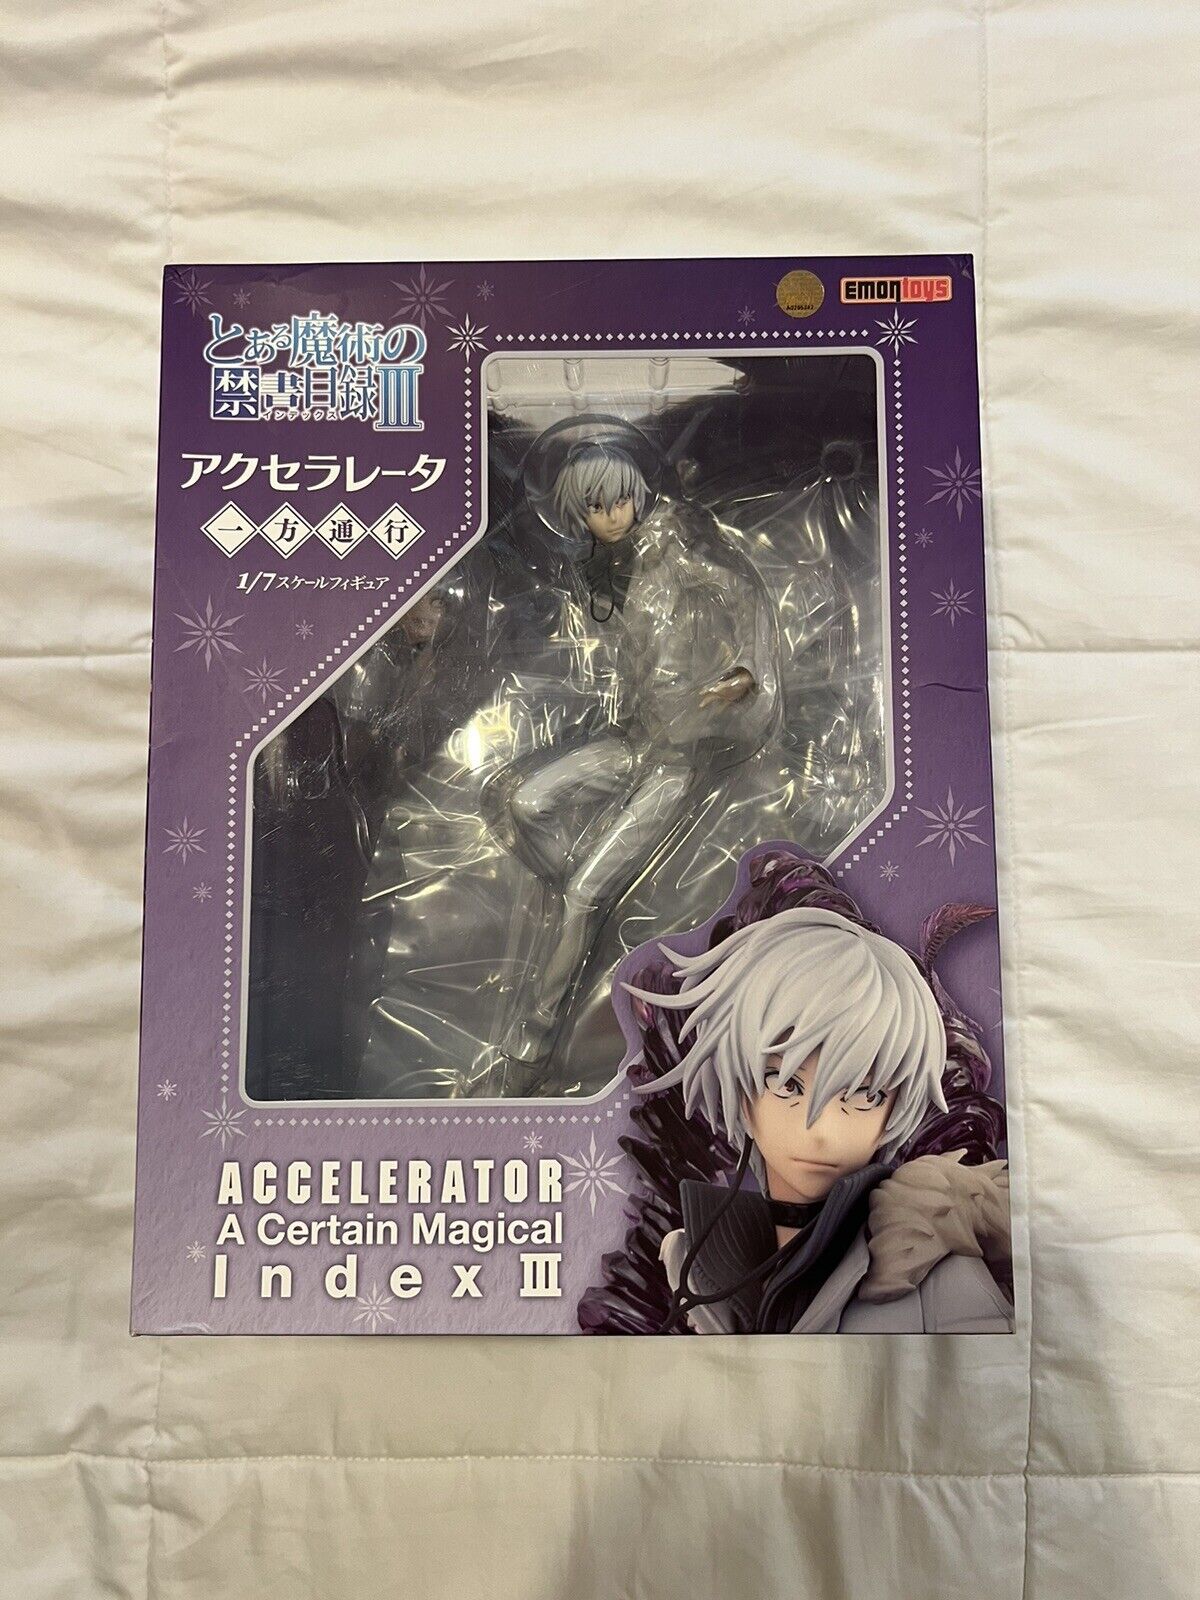 EMONTOYS A Certain Magical Index III Accelerator 1/7 PVC Figure Anime Character 